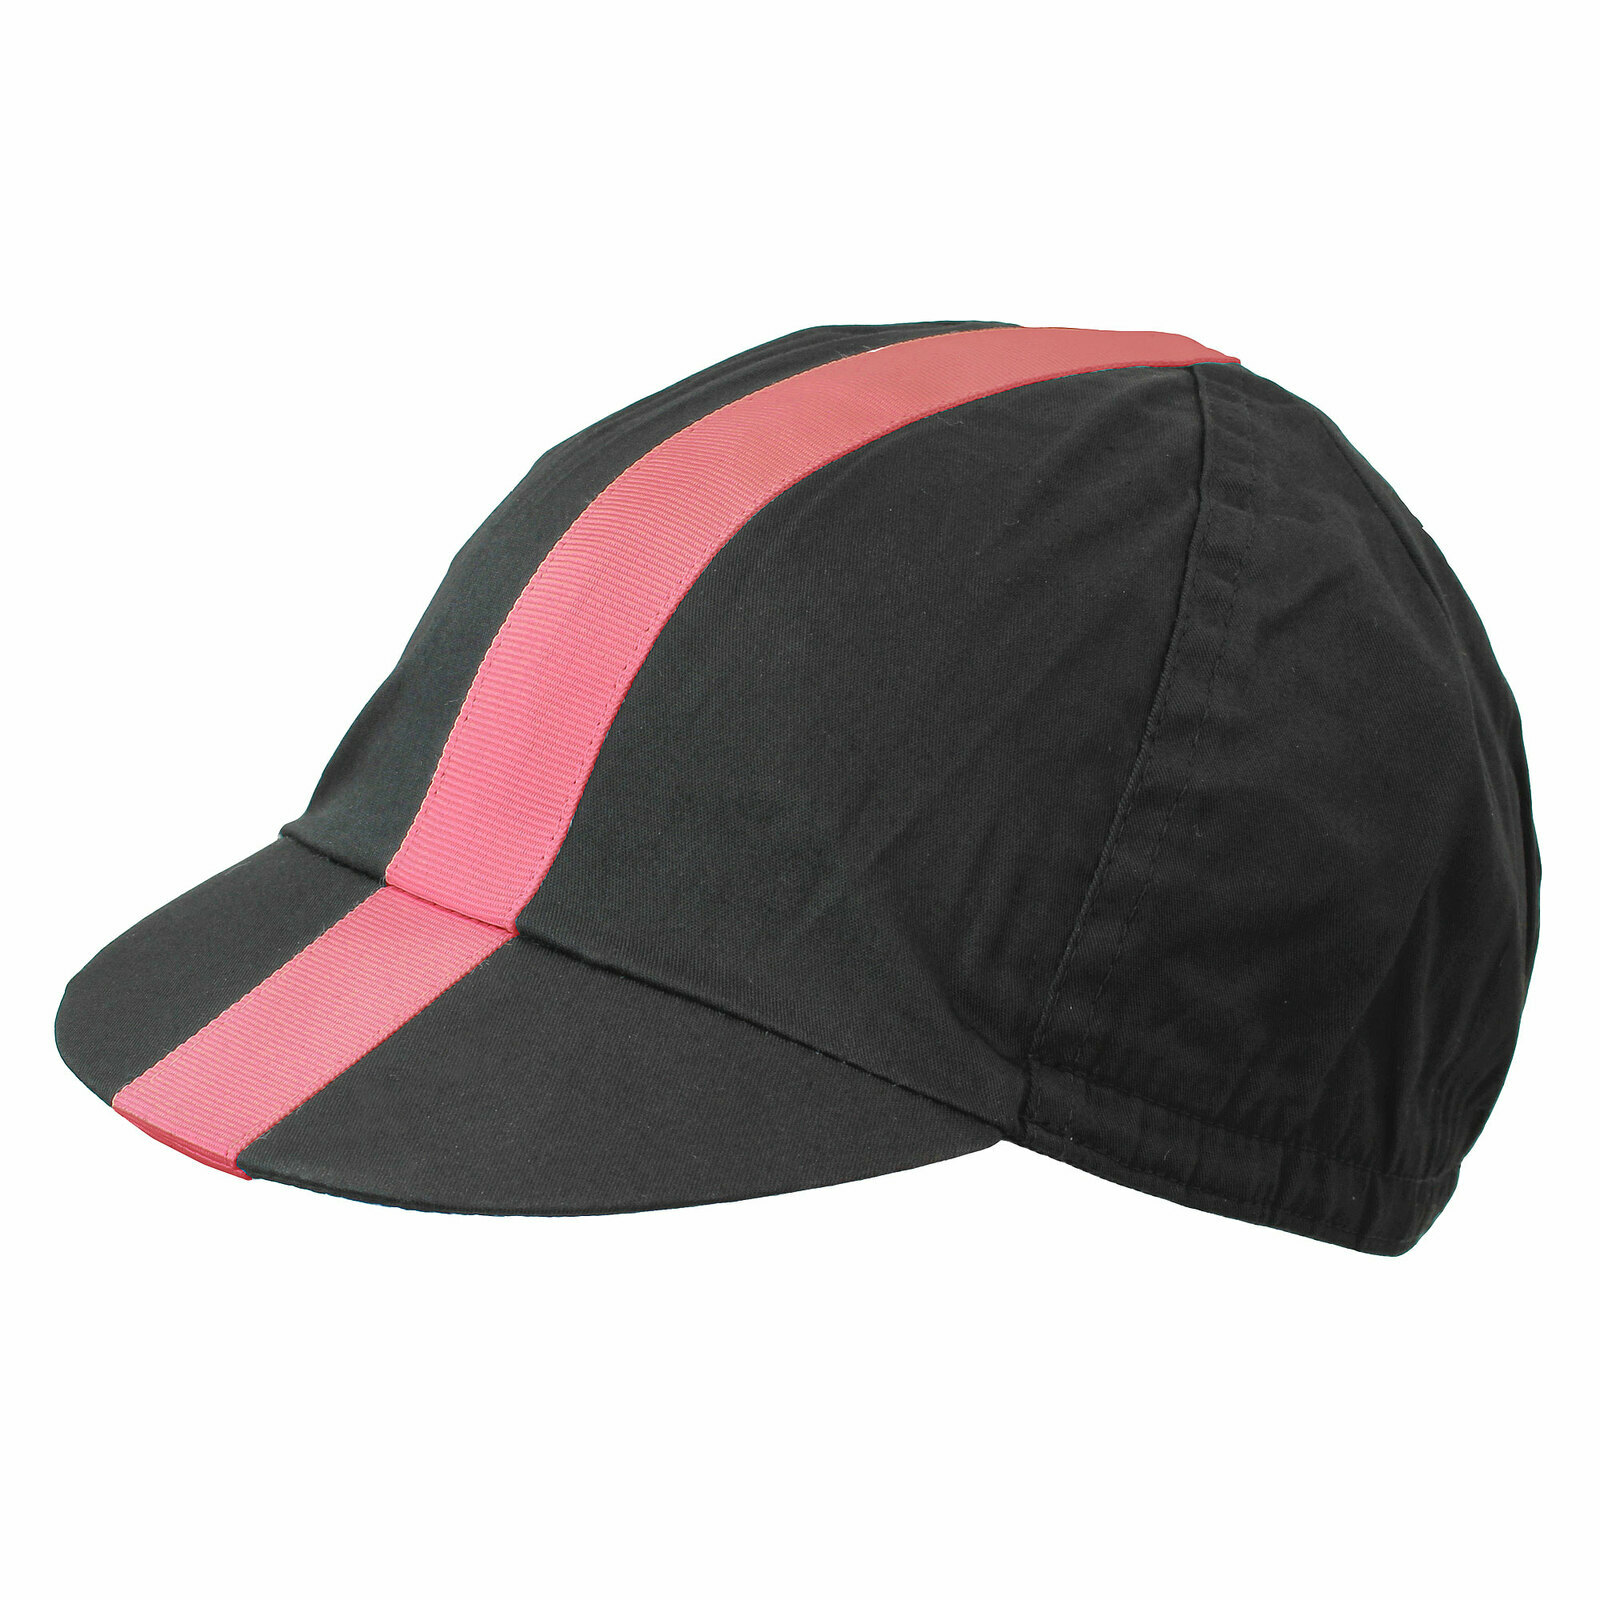 Cyclingdeal Cycling Outdoor Hat Cap Pink